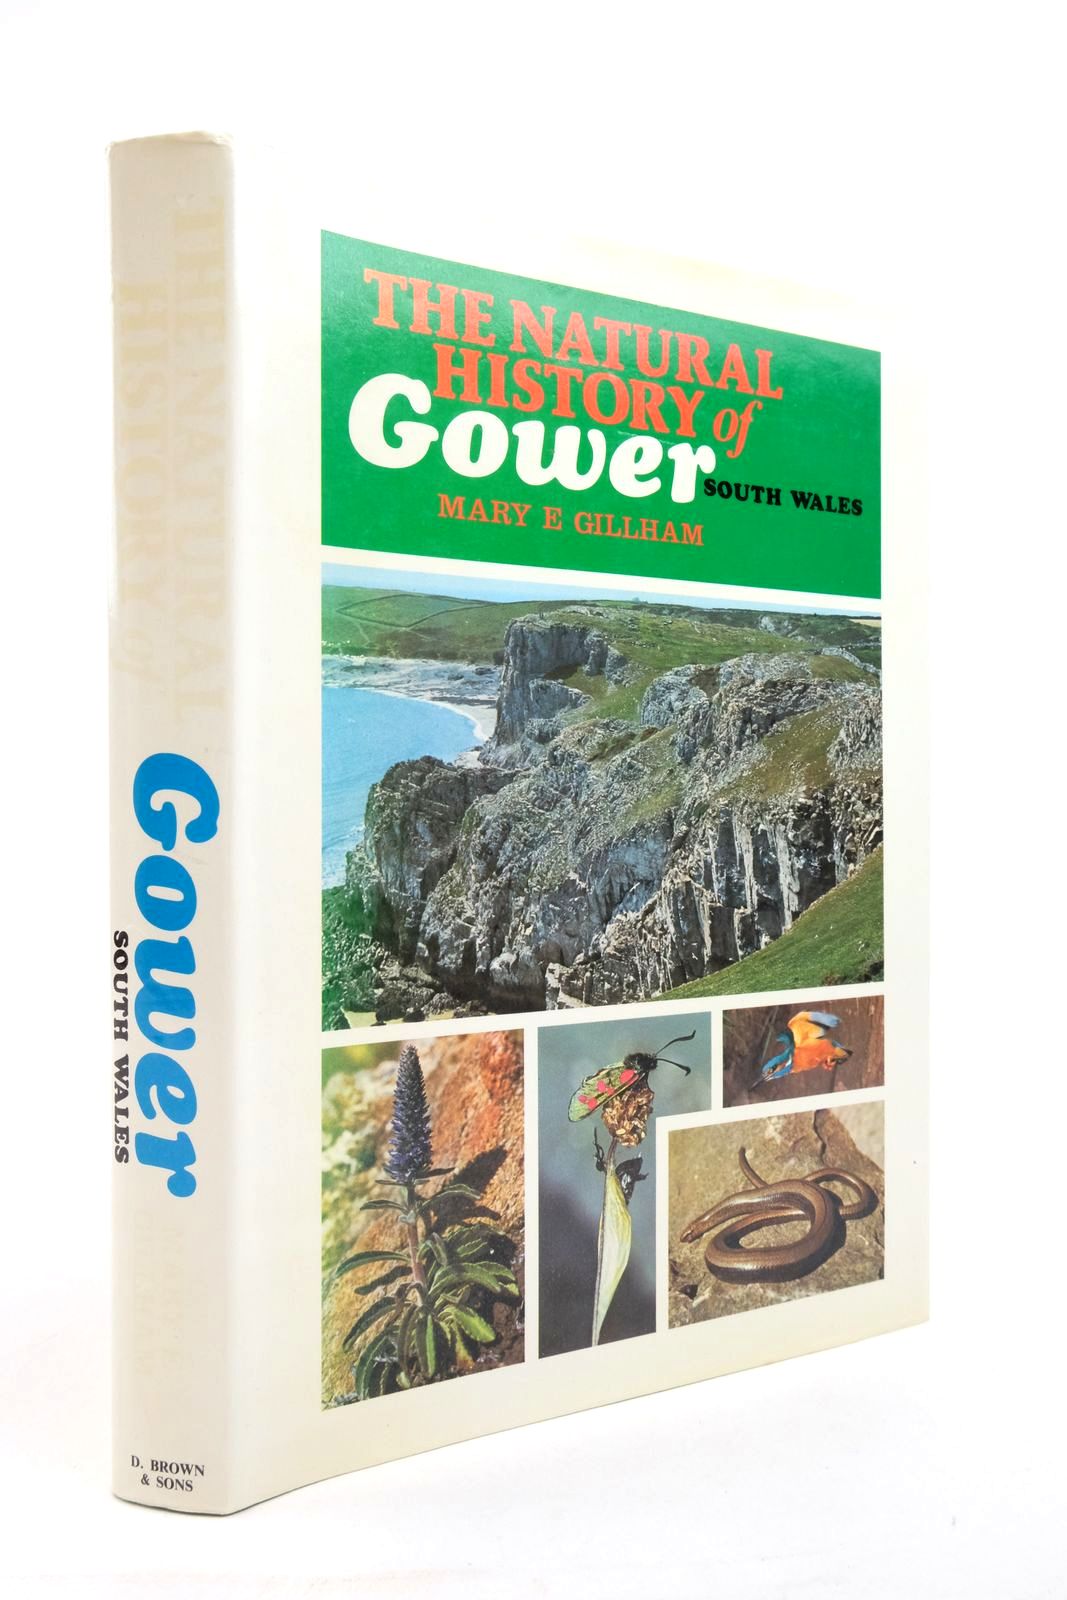 Photo of THE NATURAL HISTORY OF GOWER- Stock Number: 2137904